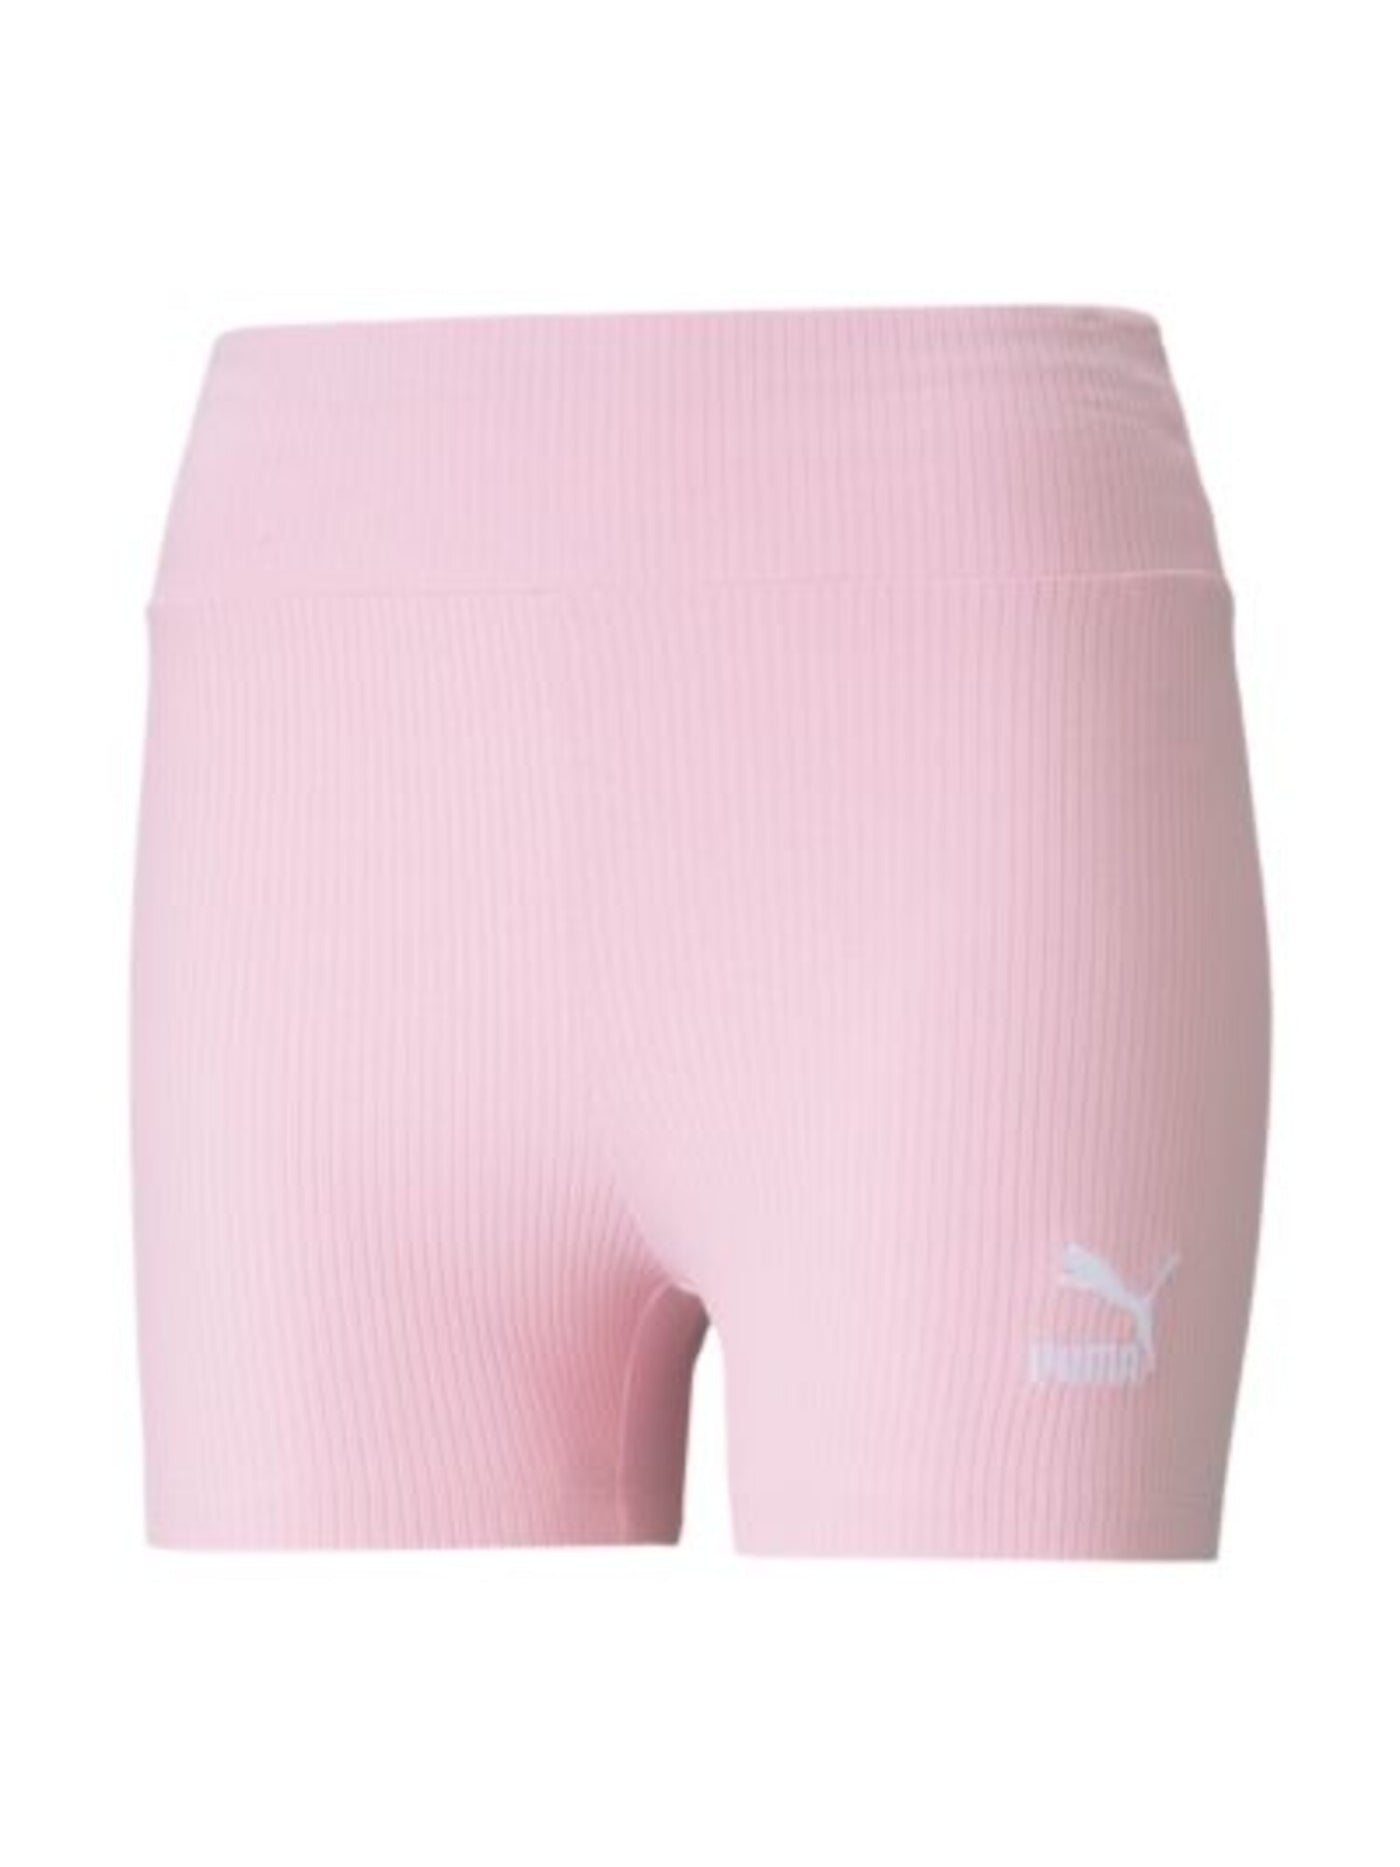 PUMA Womens Pink Fitted Pull-on Shorts XL